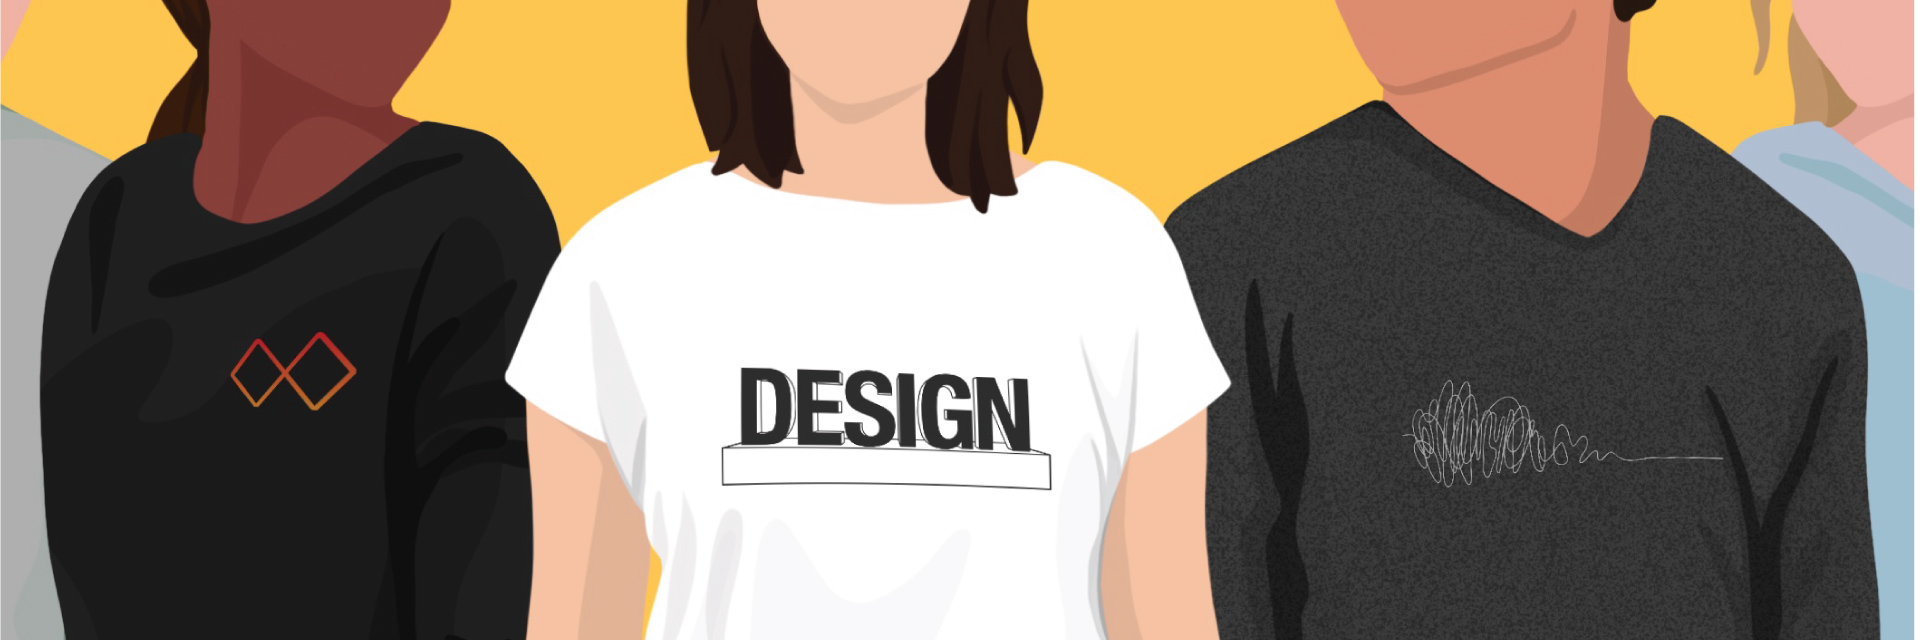 Illustration of students standing and showcasing their IDSA t-shirts.